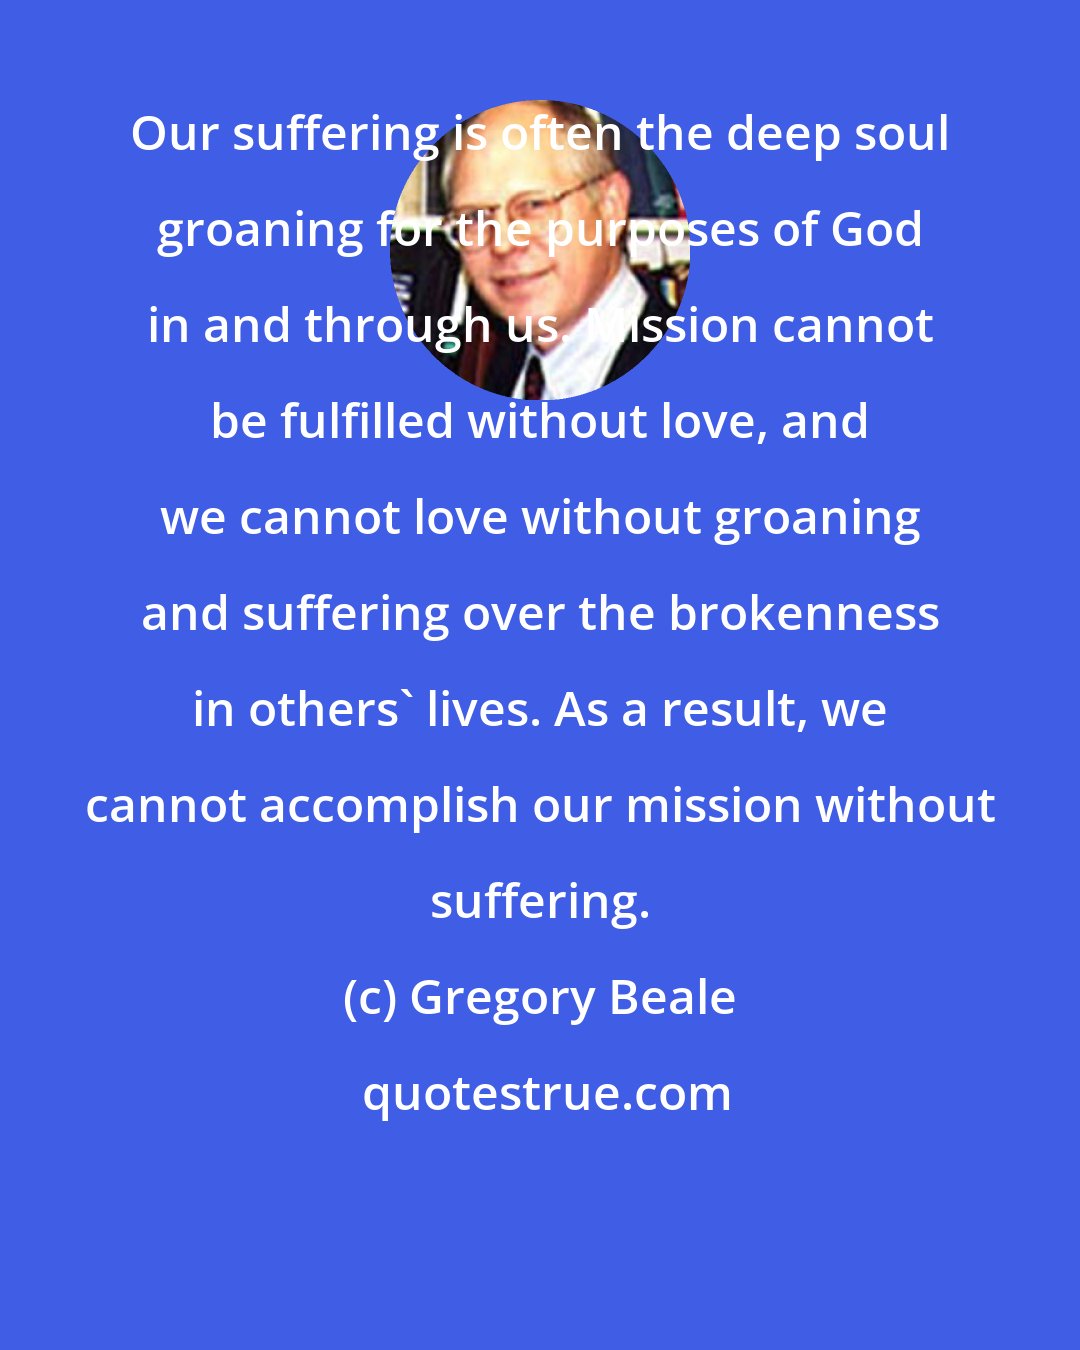 Gregory Beale: Our suffering is often the deep soul groaning for the purposes of God in and through us. Mission cannot be fulfilled without love, and we cannot love without groaning and suffering over the brokenness in others' lives. As a result, we cannot accomplish our mission without suffering.